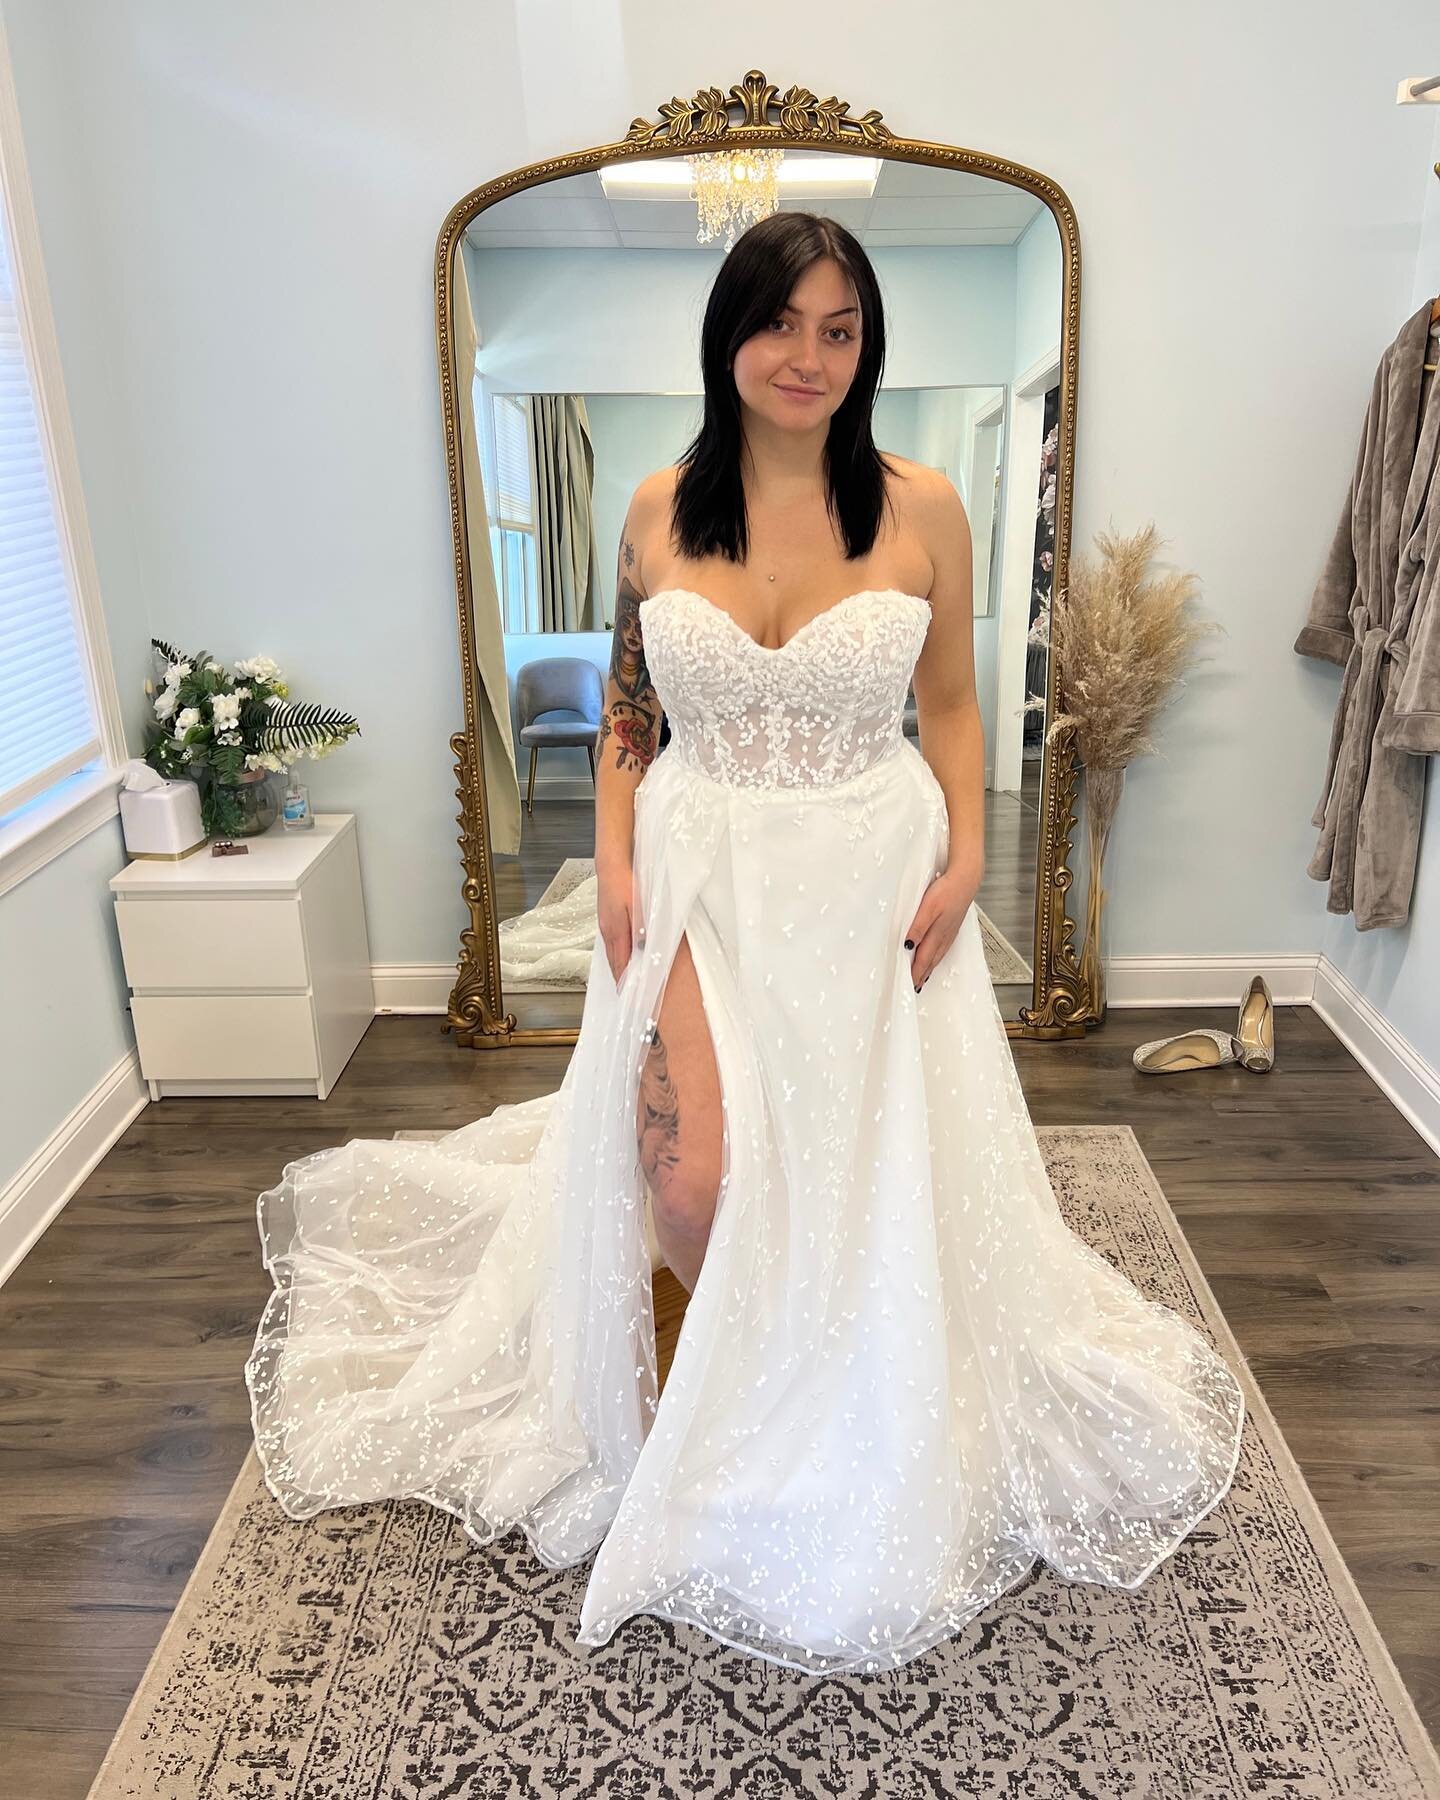 Looking for something classic with a twist? Meet brand new style #Tinsly by @allwhowander 😍 With unique embroidery detail and a sexy slit, she is definitely one of a kind 🤍 #allwhowander #bsbbride #njbride #njwedding